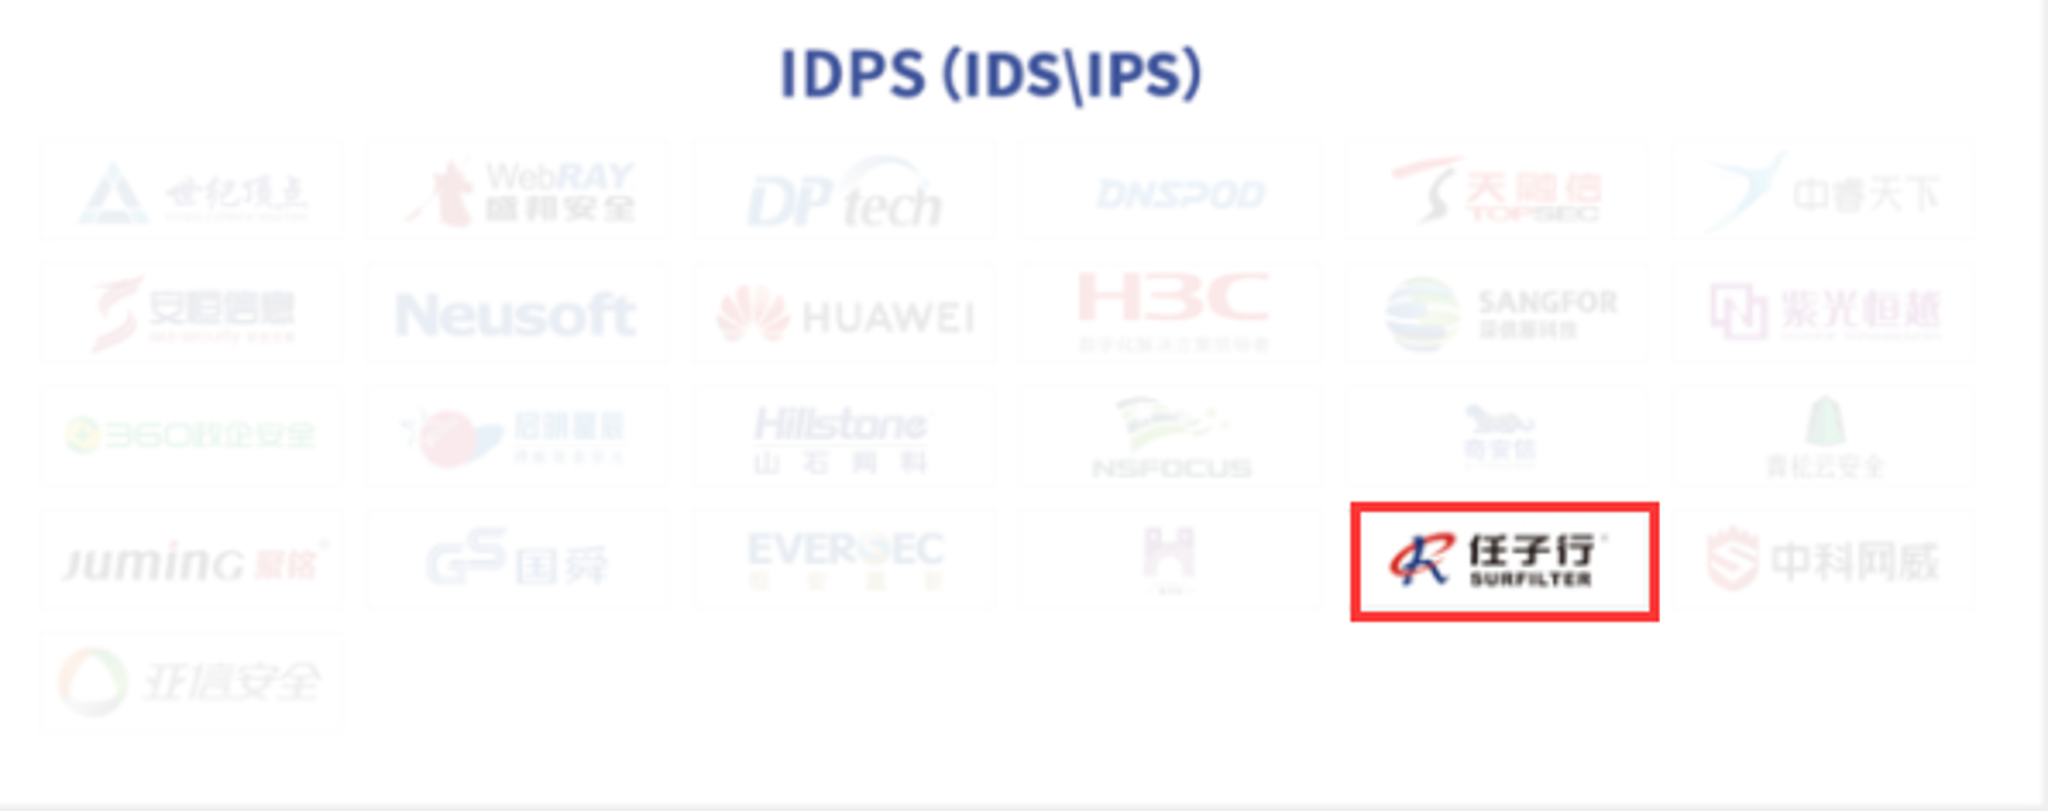 9.IDPS(IDS-IPS).png